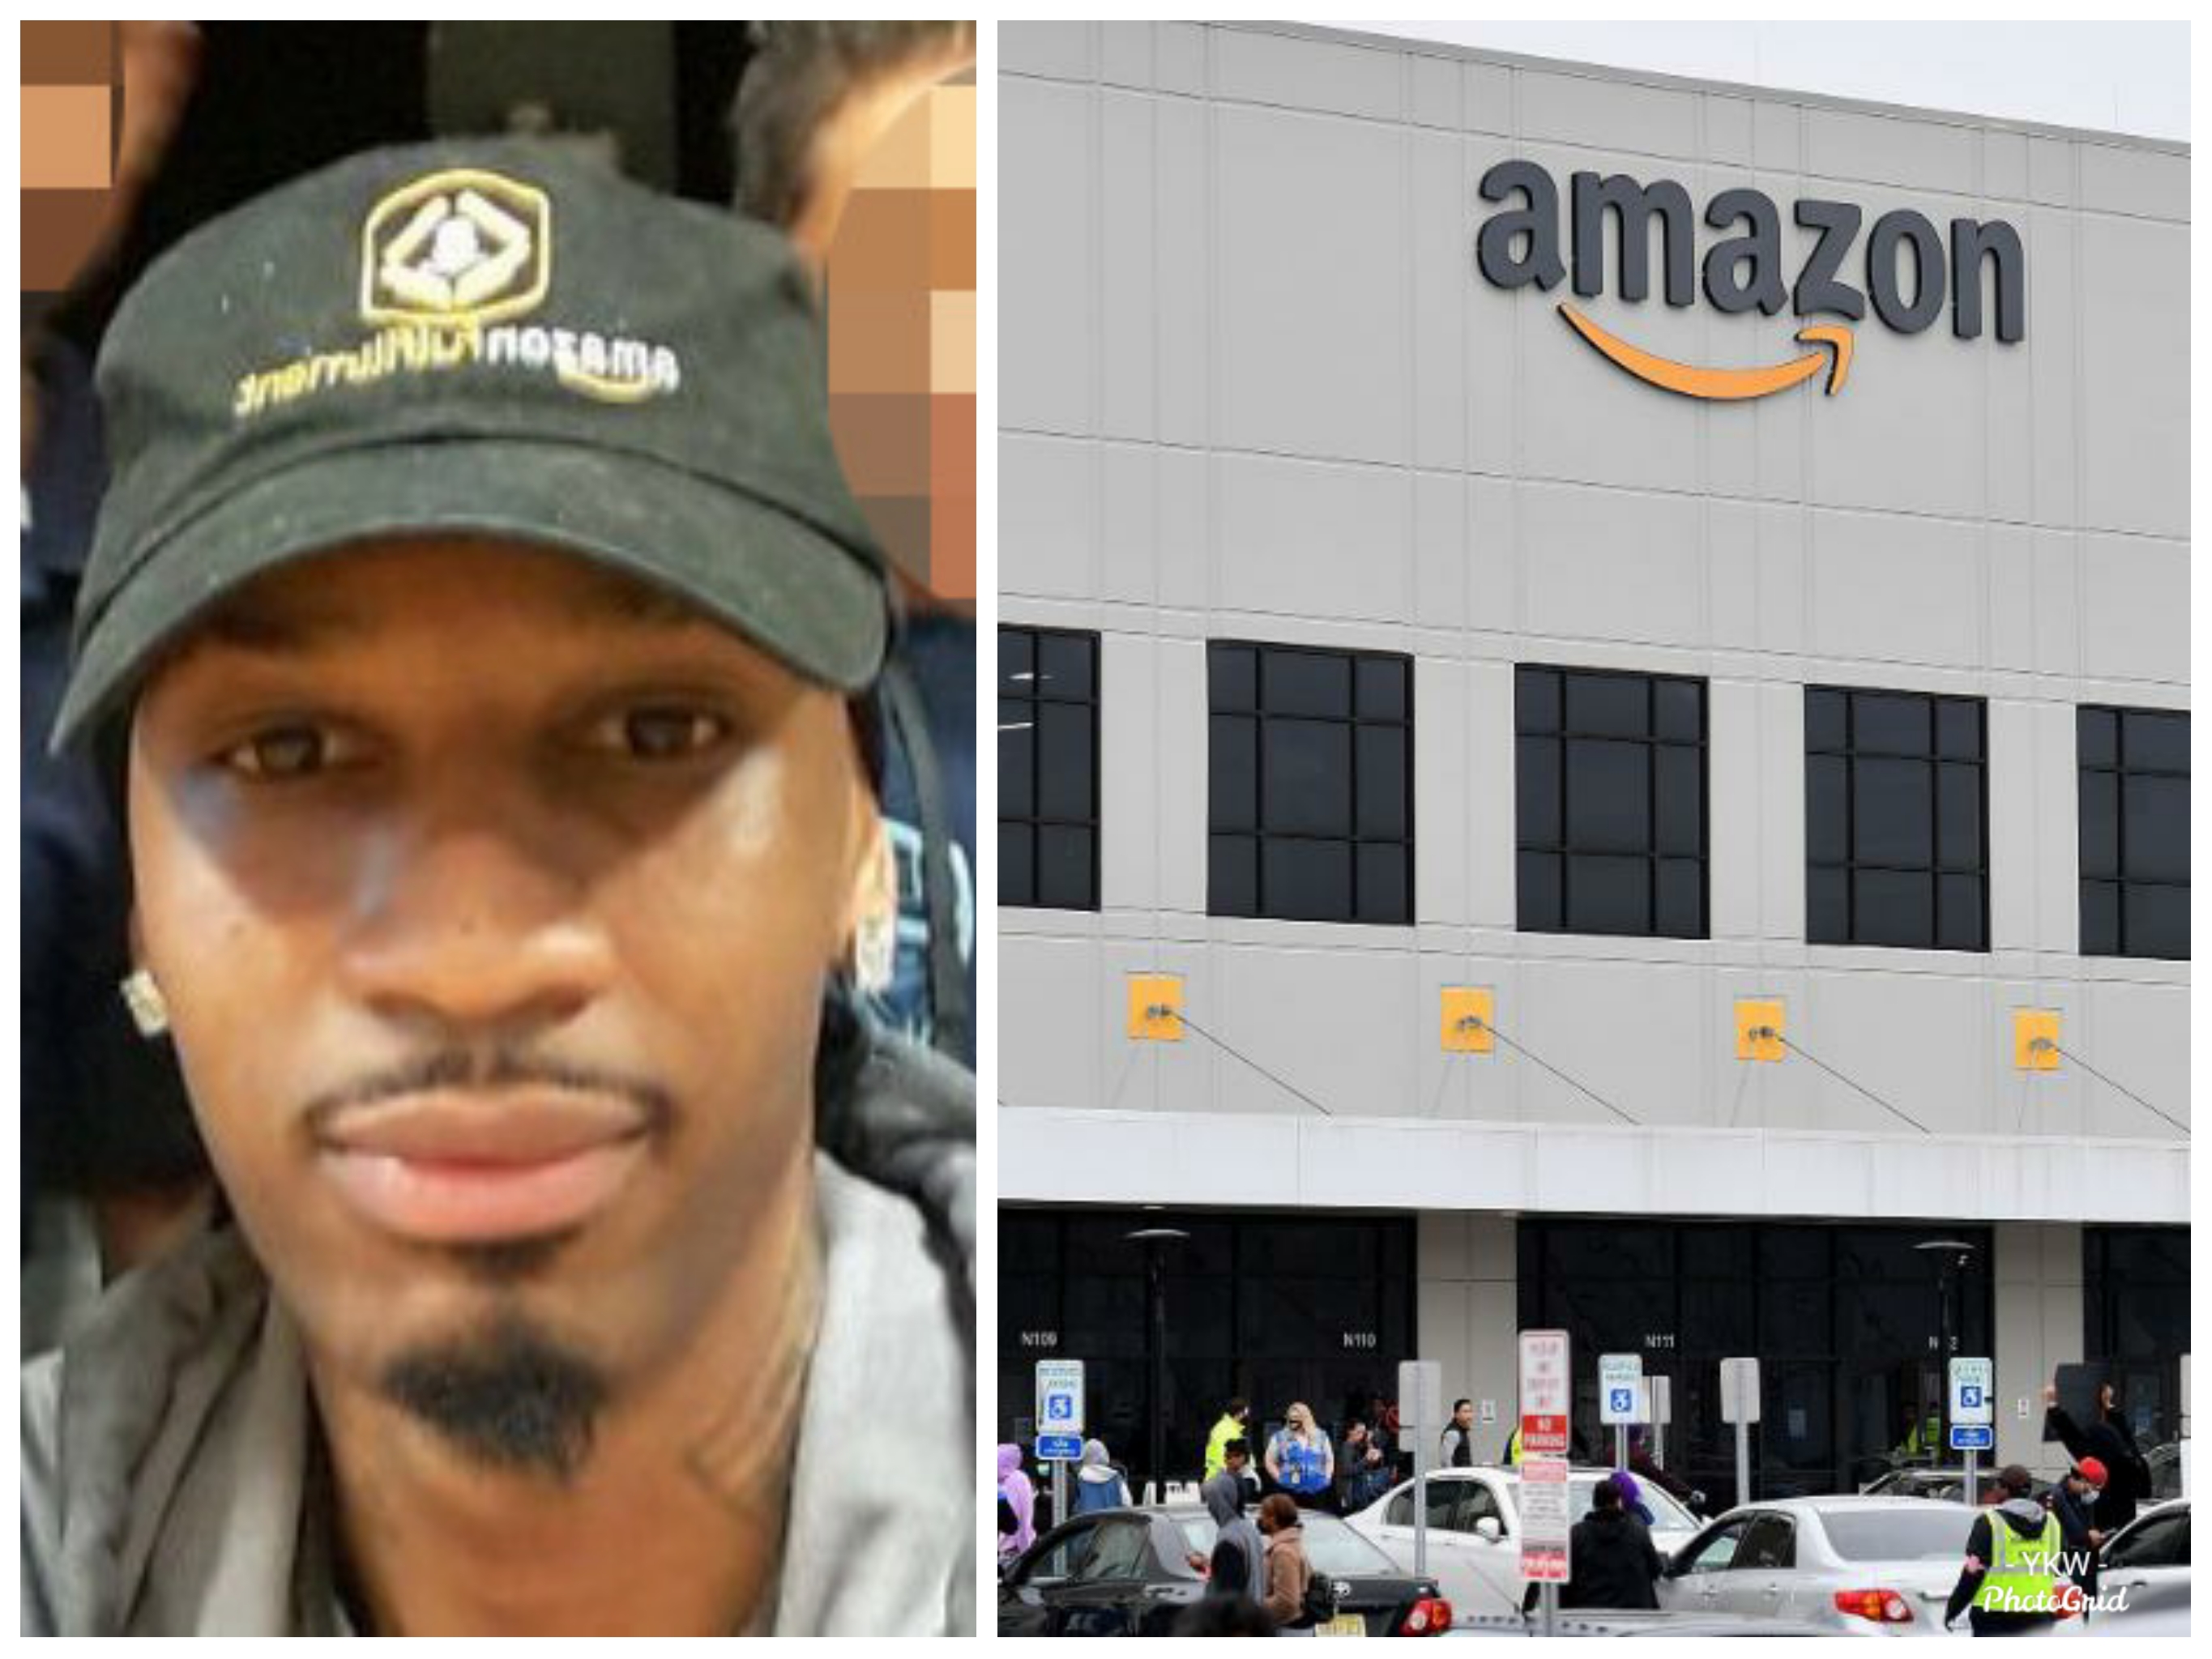 Amazon Employee Fired After Staging A Walkout To Protest Unsafe Conditions During Coronavirus Pandemic